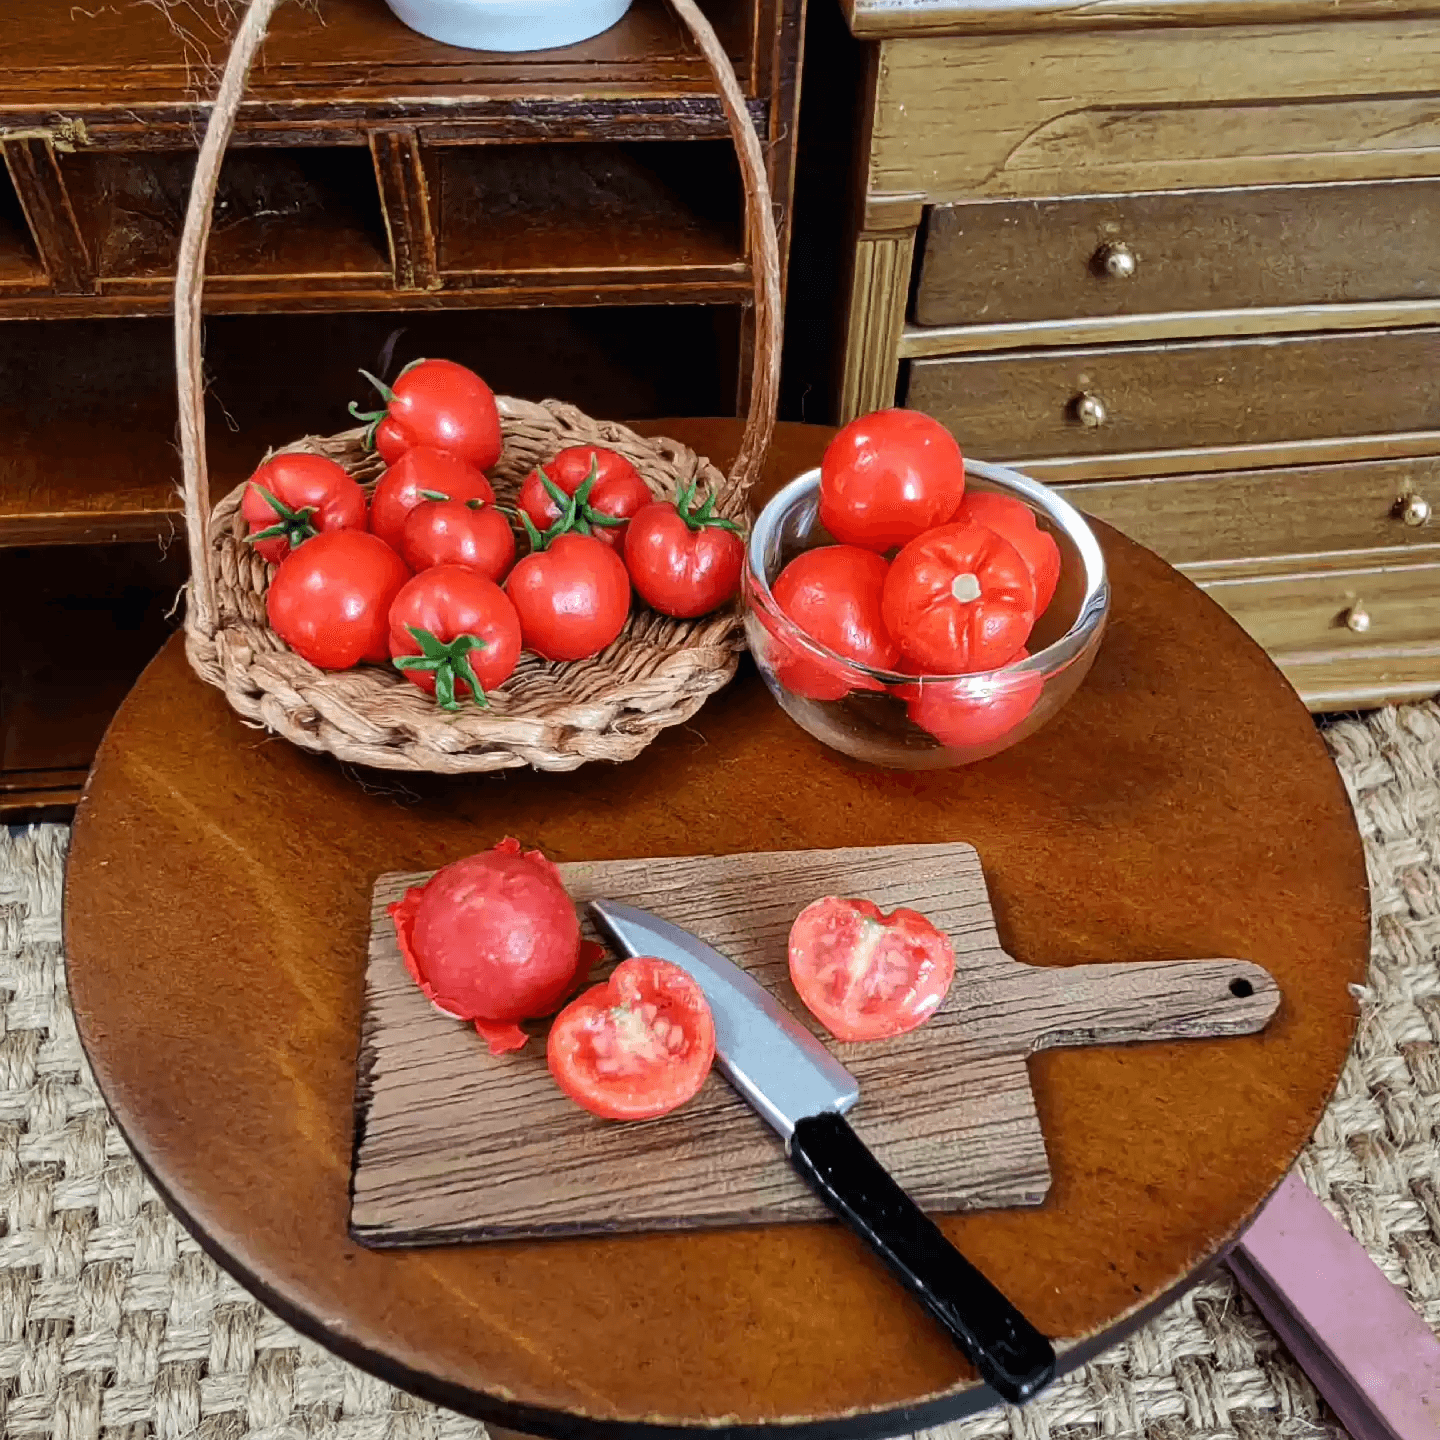 This miniature fruit Tomato would be a wonderful addition to any doll's house kitchen or dining room table. Miniature fruits for dollhouse. Miniature Tomato handmade from clay. Miniature fruits in 1/6 and 1/8 scale can be used in doll kitchen, doll grocery store, doll food, collection, diorama decoration.